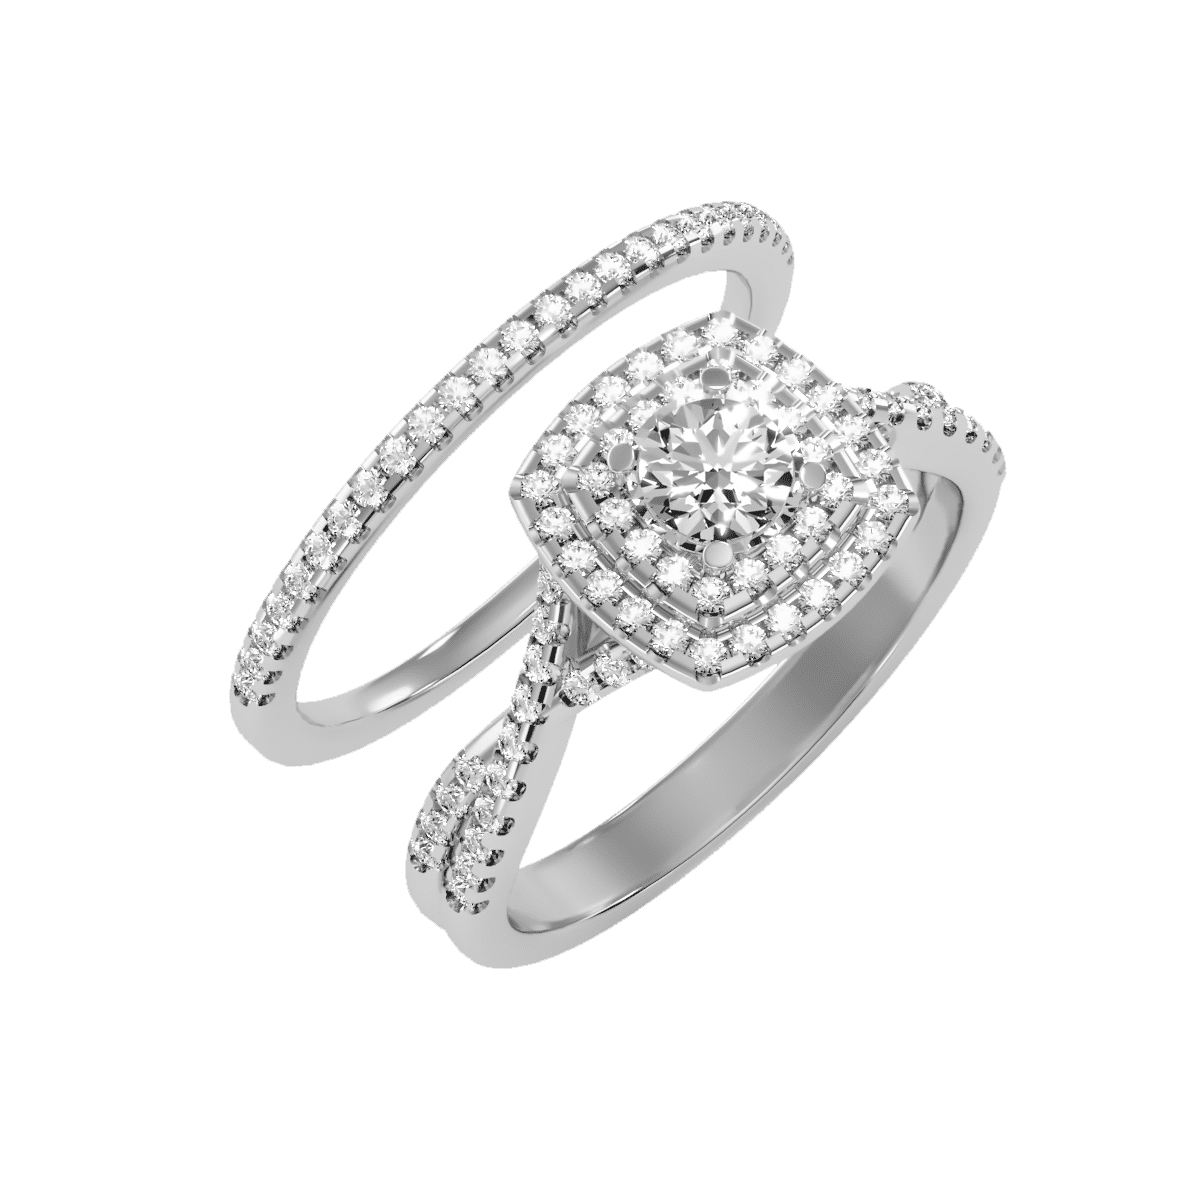 Double Square Halo Engagement Ring With Dainty Wedding Band